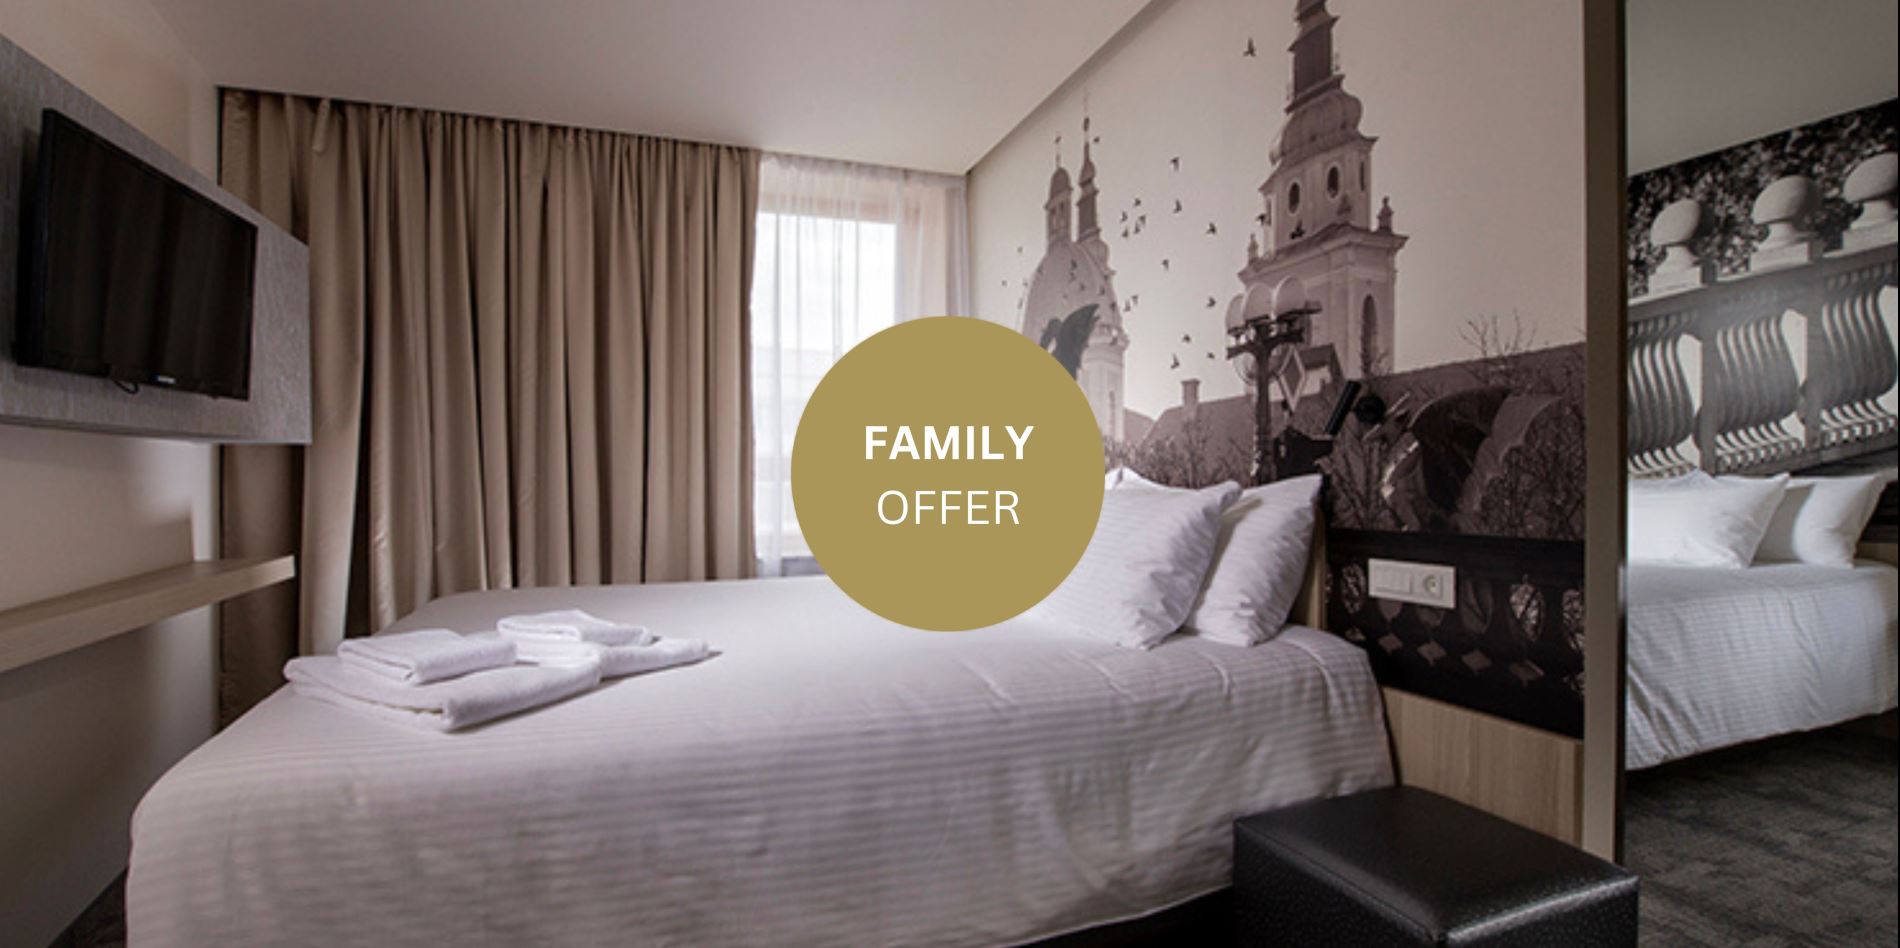 Choose from a variety of Family, Triple and Quadruple rooms. Biggest selection among Ljubljana hotels!